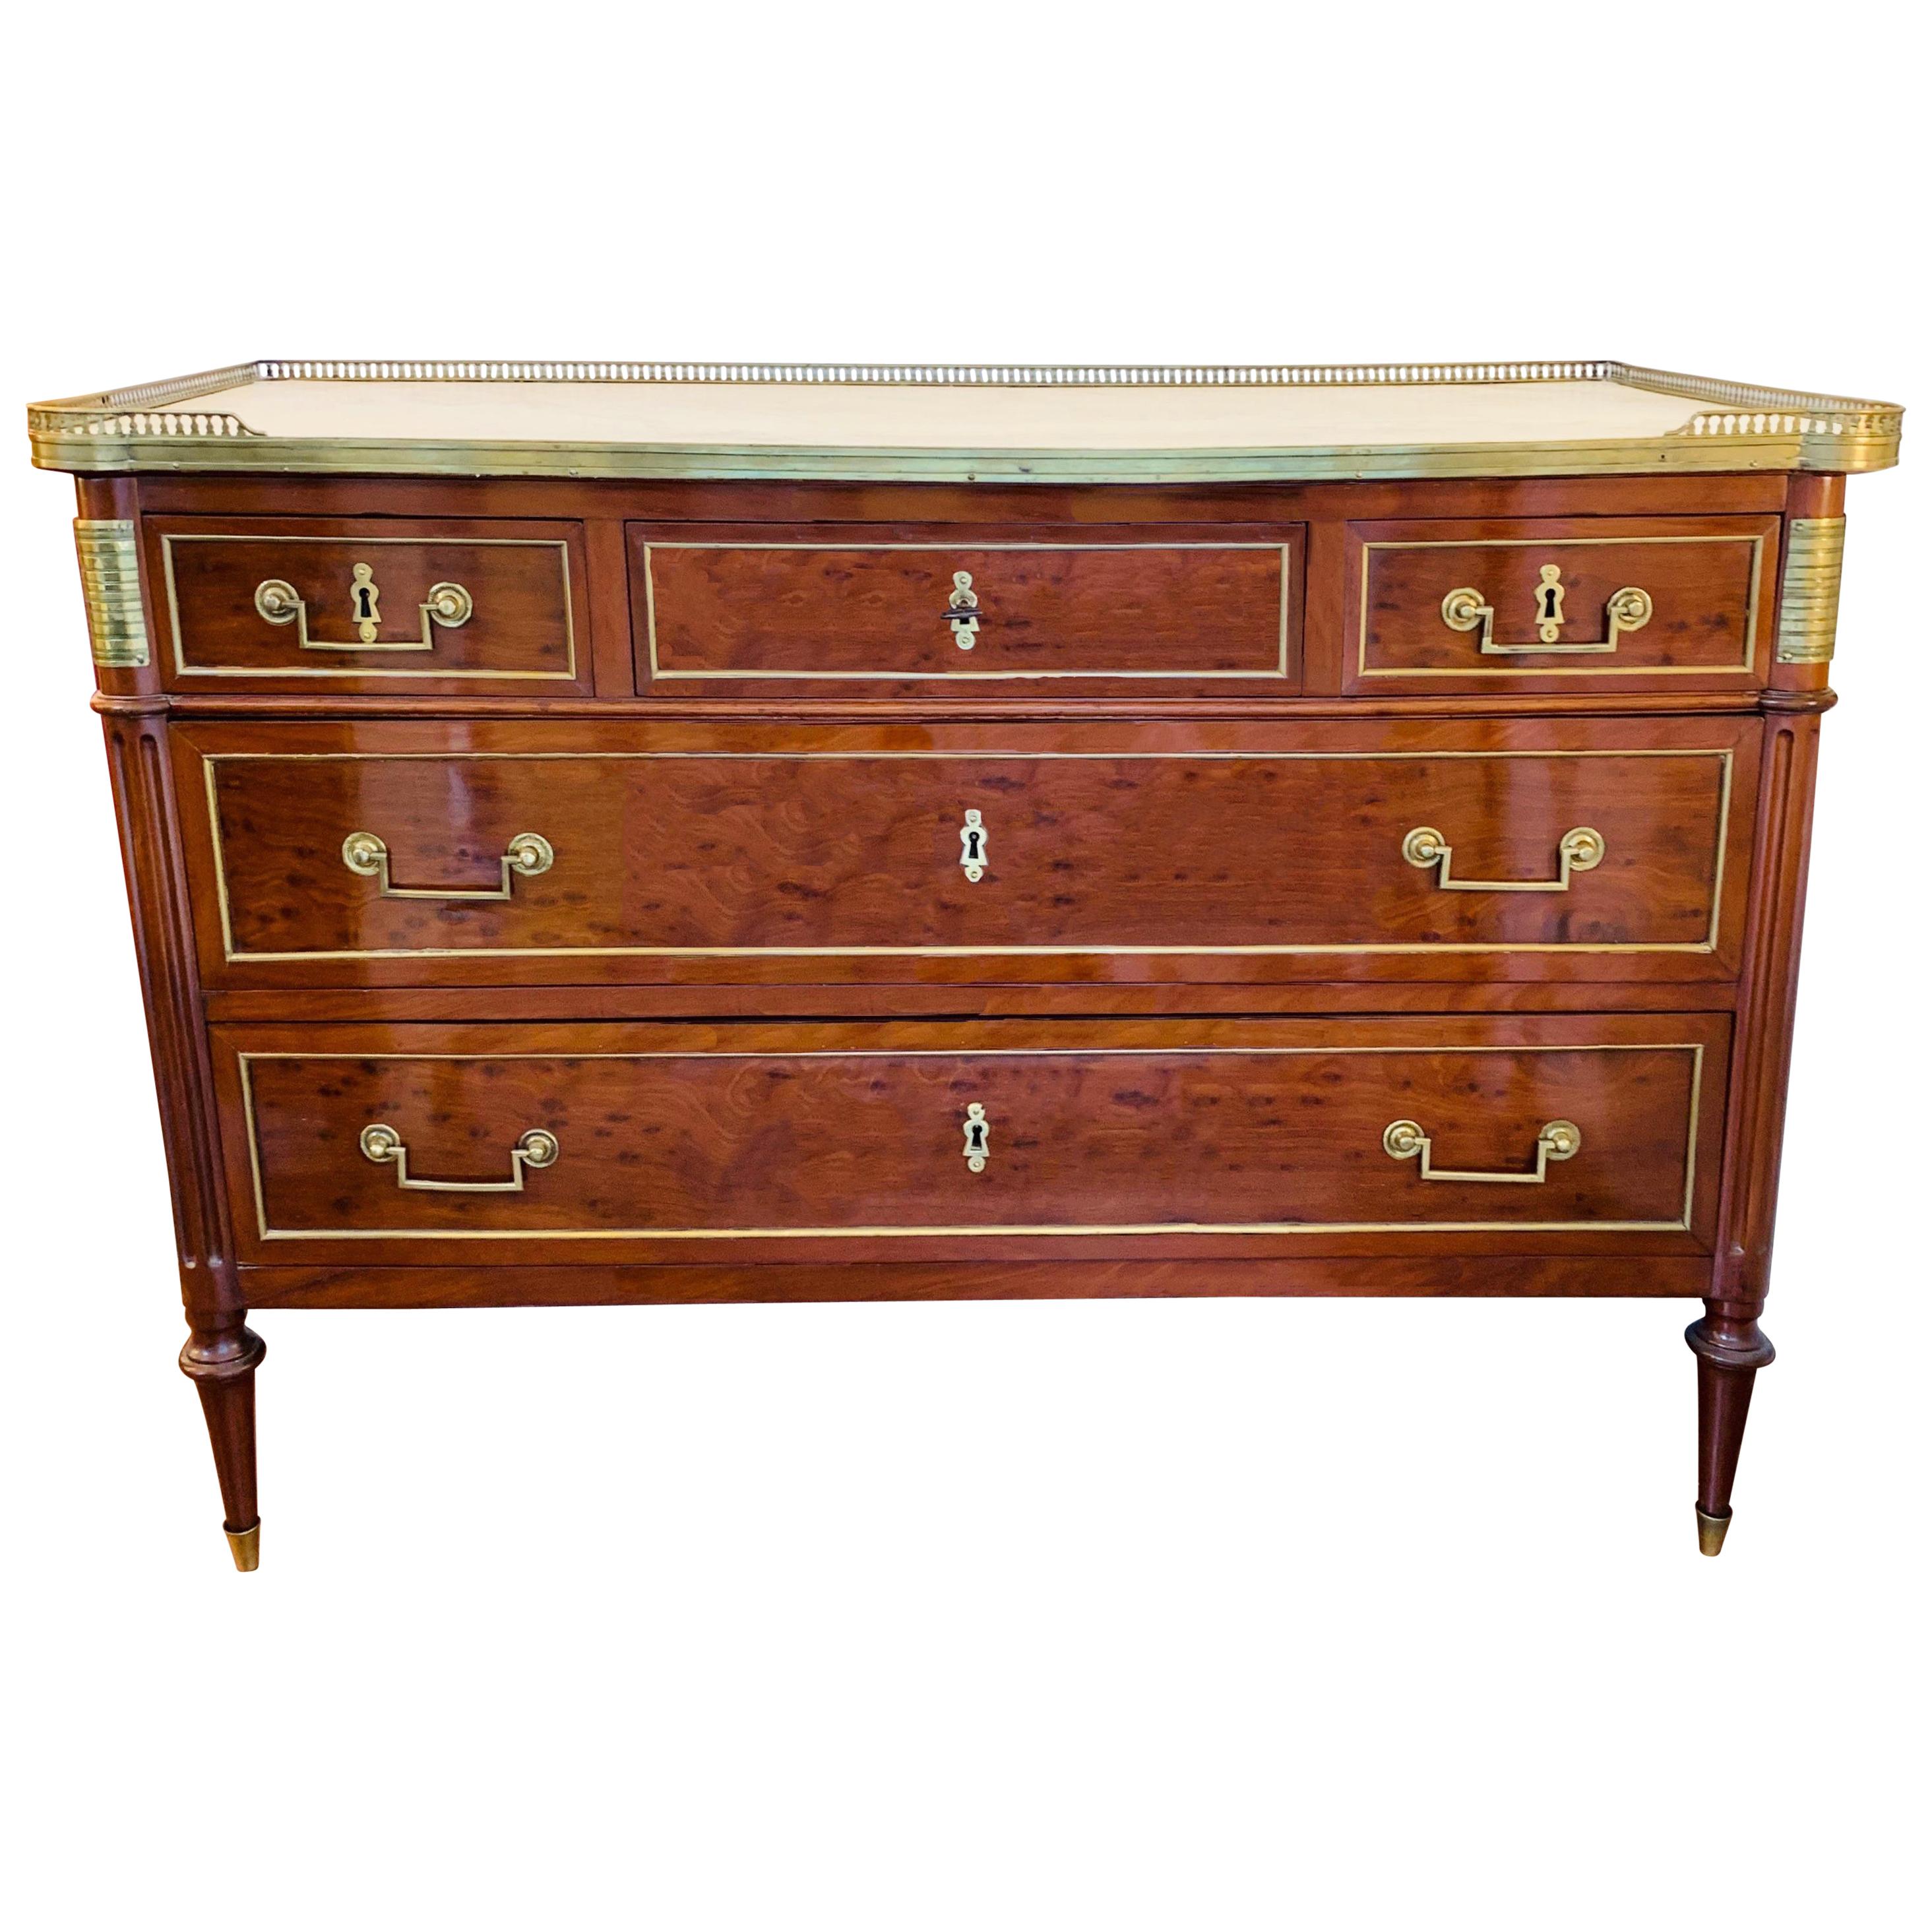 Antique French Directoire Brass Mounted Mahogany Commode with White Marble Top